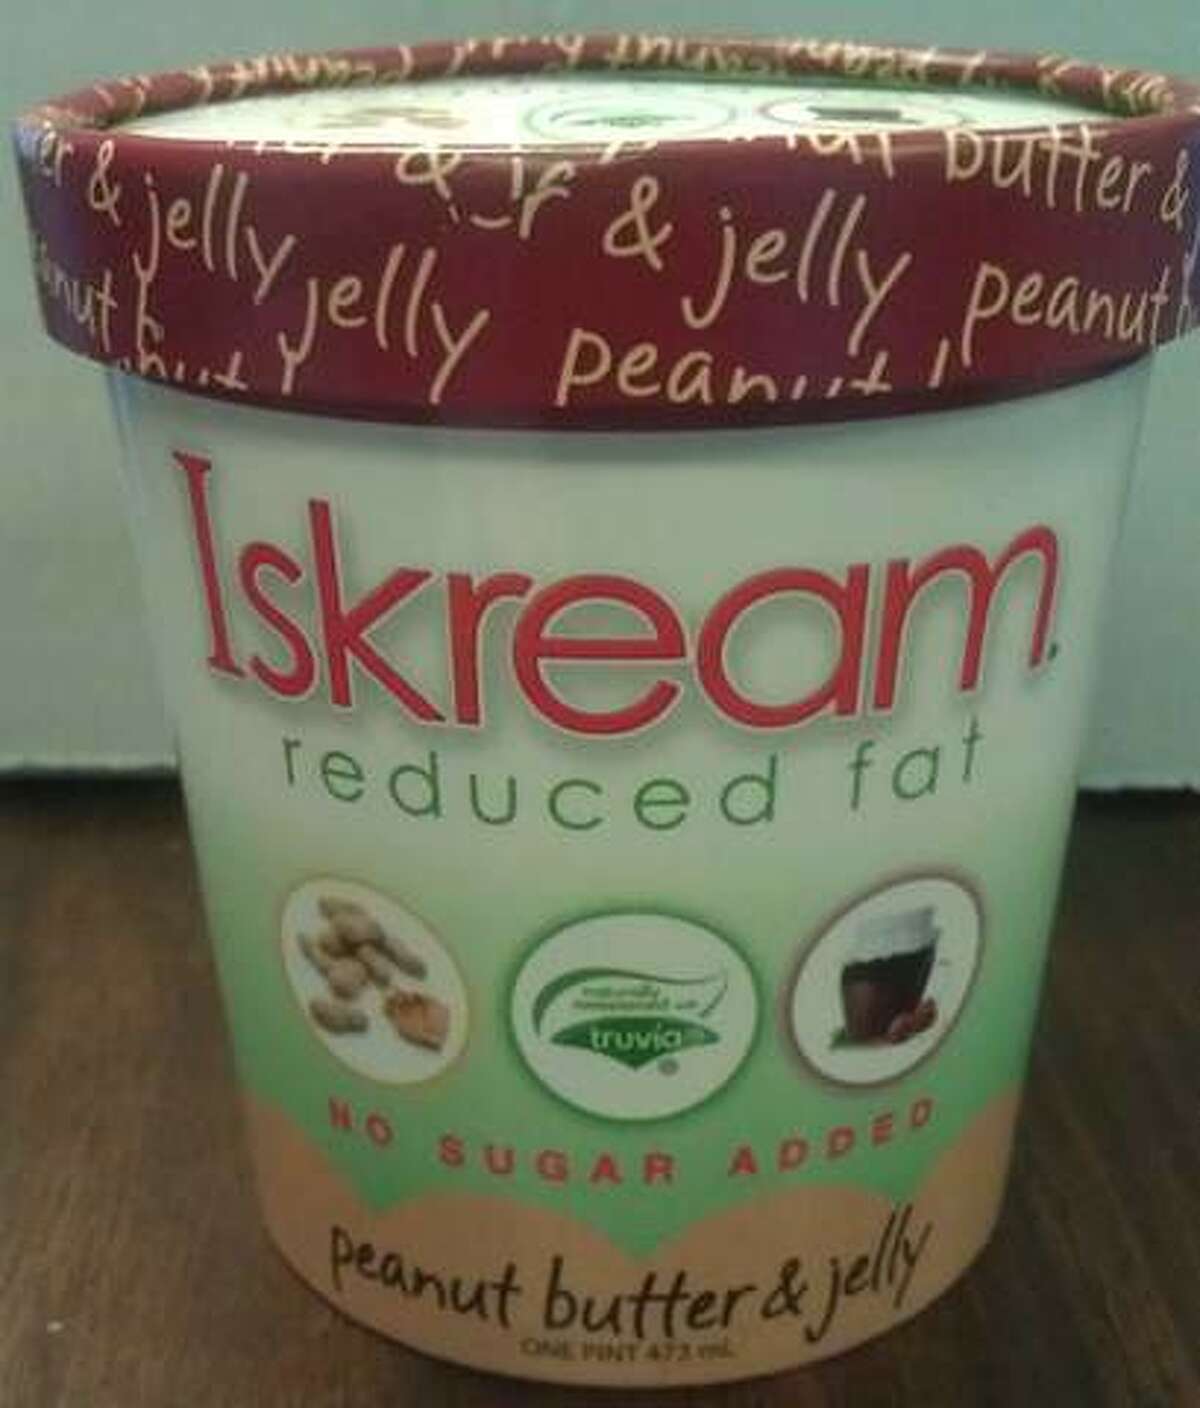 A Milford ice cream manufacturer is recalling its peanut butter and jelly ice cream in response to a salmonella outbreak from peanut butter processed in a New Mexico factory. Buck s Ice Cream Inc. which produces the Iskream brand Peanut Butter and Jelly No Sugar Added ice cream is voluntarily recalling all lot codes of the product because of the potential of salmonella contamination, according to the U.S. Food and Drug Administration.